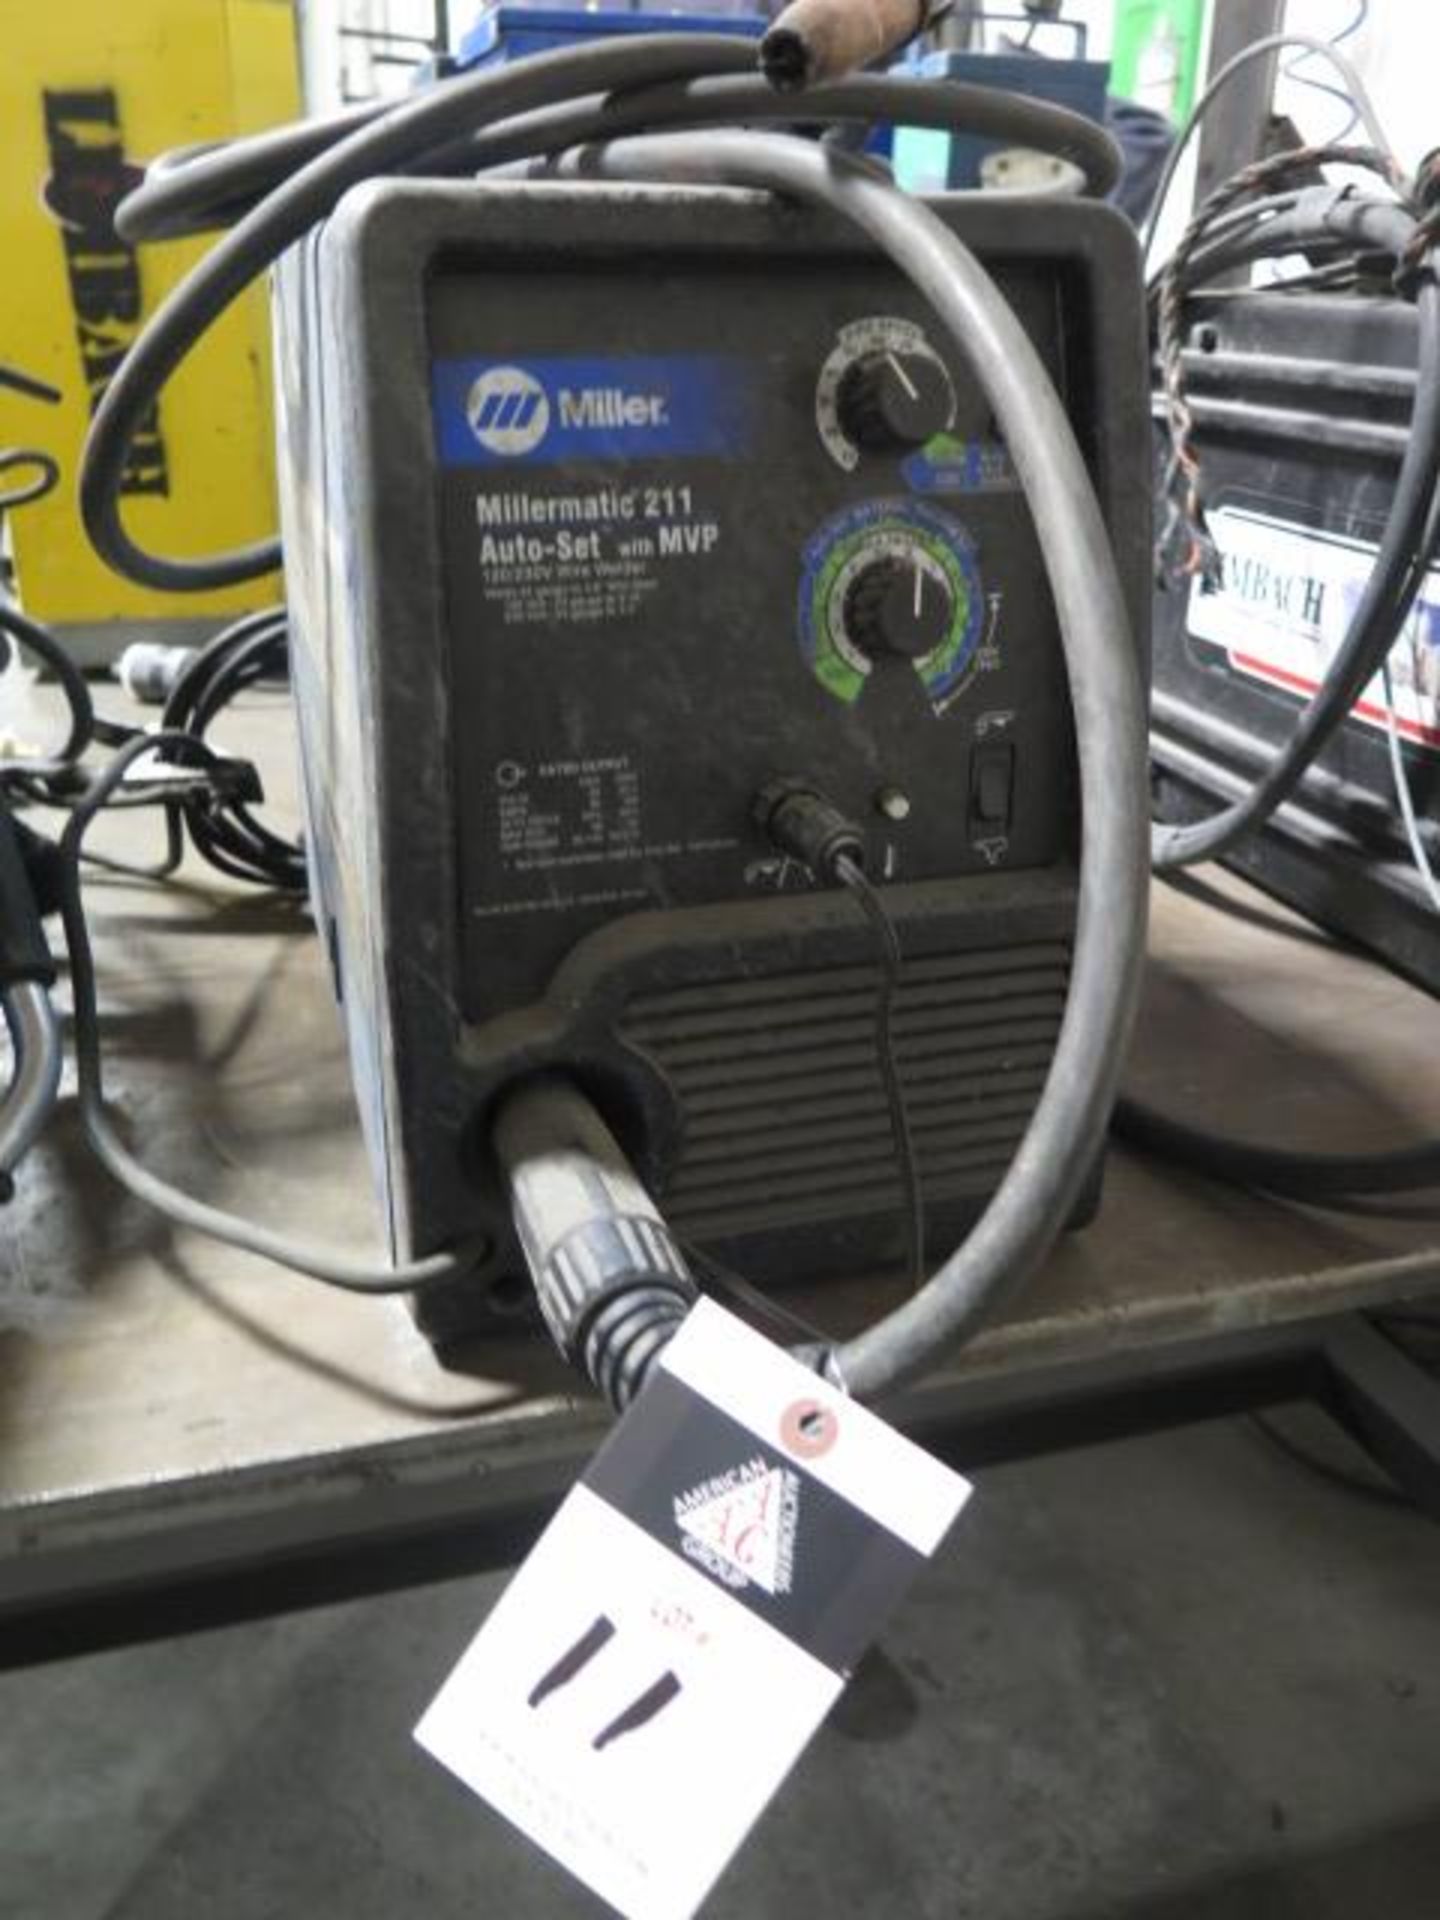 Miller Millermatic 211 Auto-Set with MVP 120/230V Wire Welder s/n MD450585N (SOLD AS-IS - NO